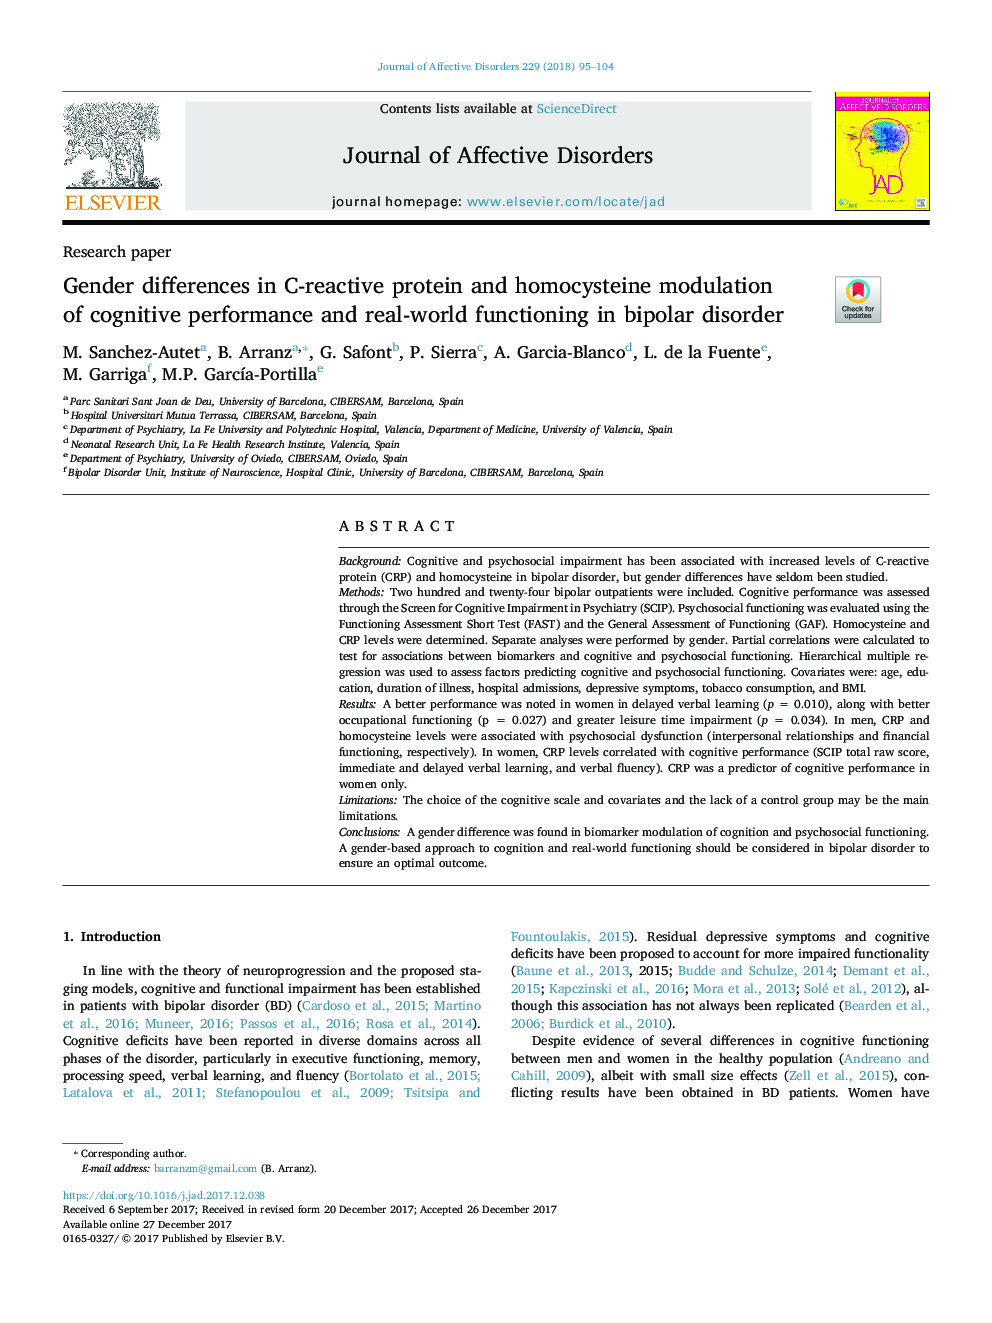 Gender differences in C-reactive protein and homocysteine modulation of cognitive performance and real-world functioning in bipolar disorder